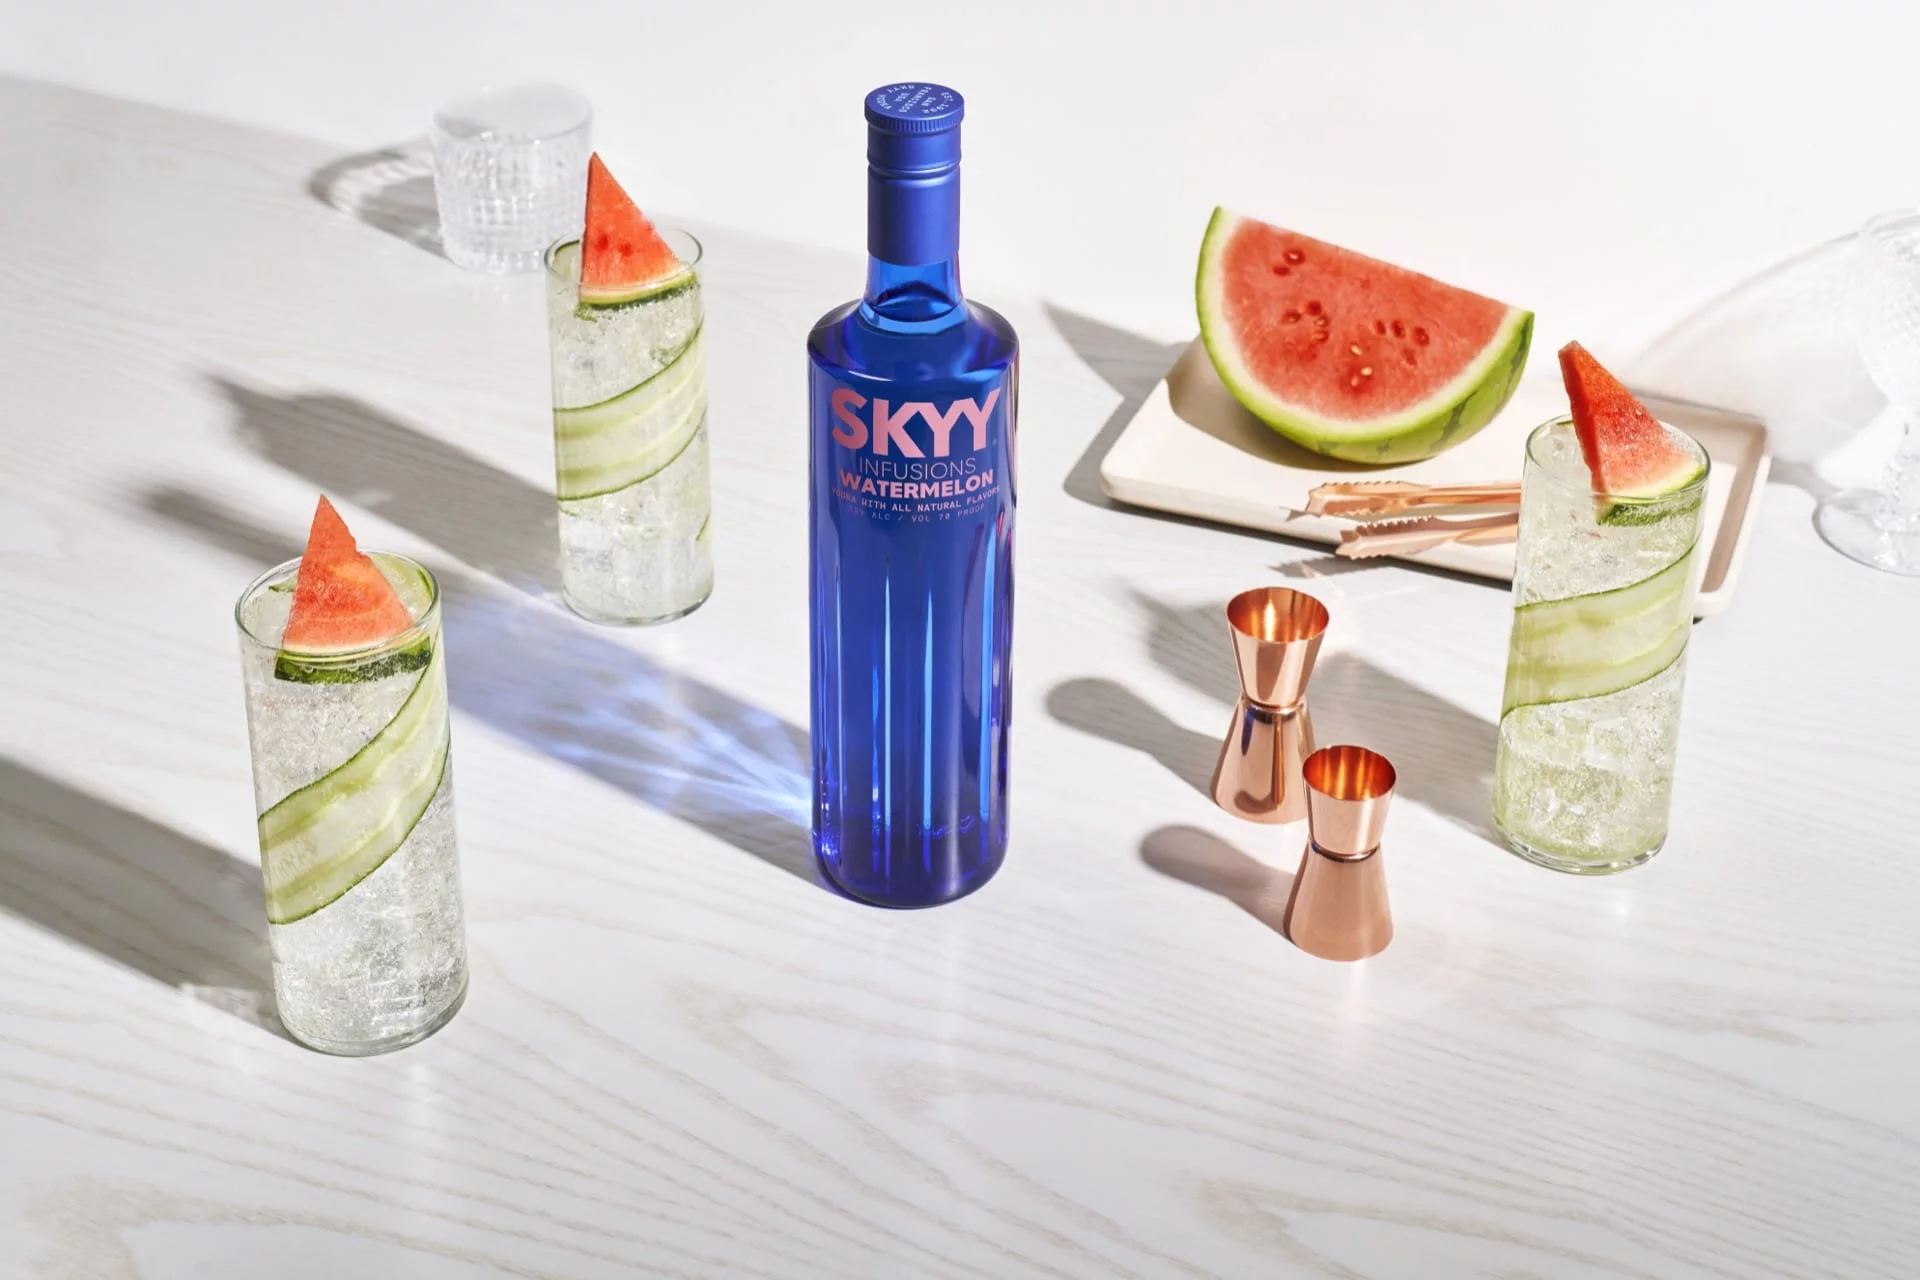 products-skyy-infusions-watermelon-fullsize